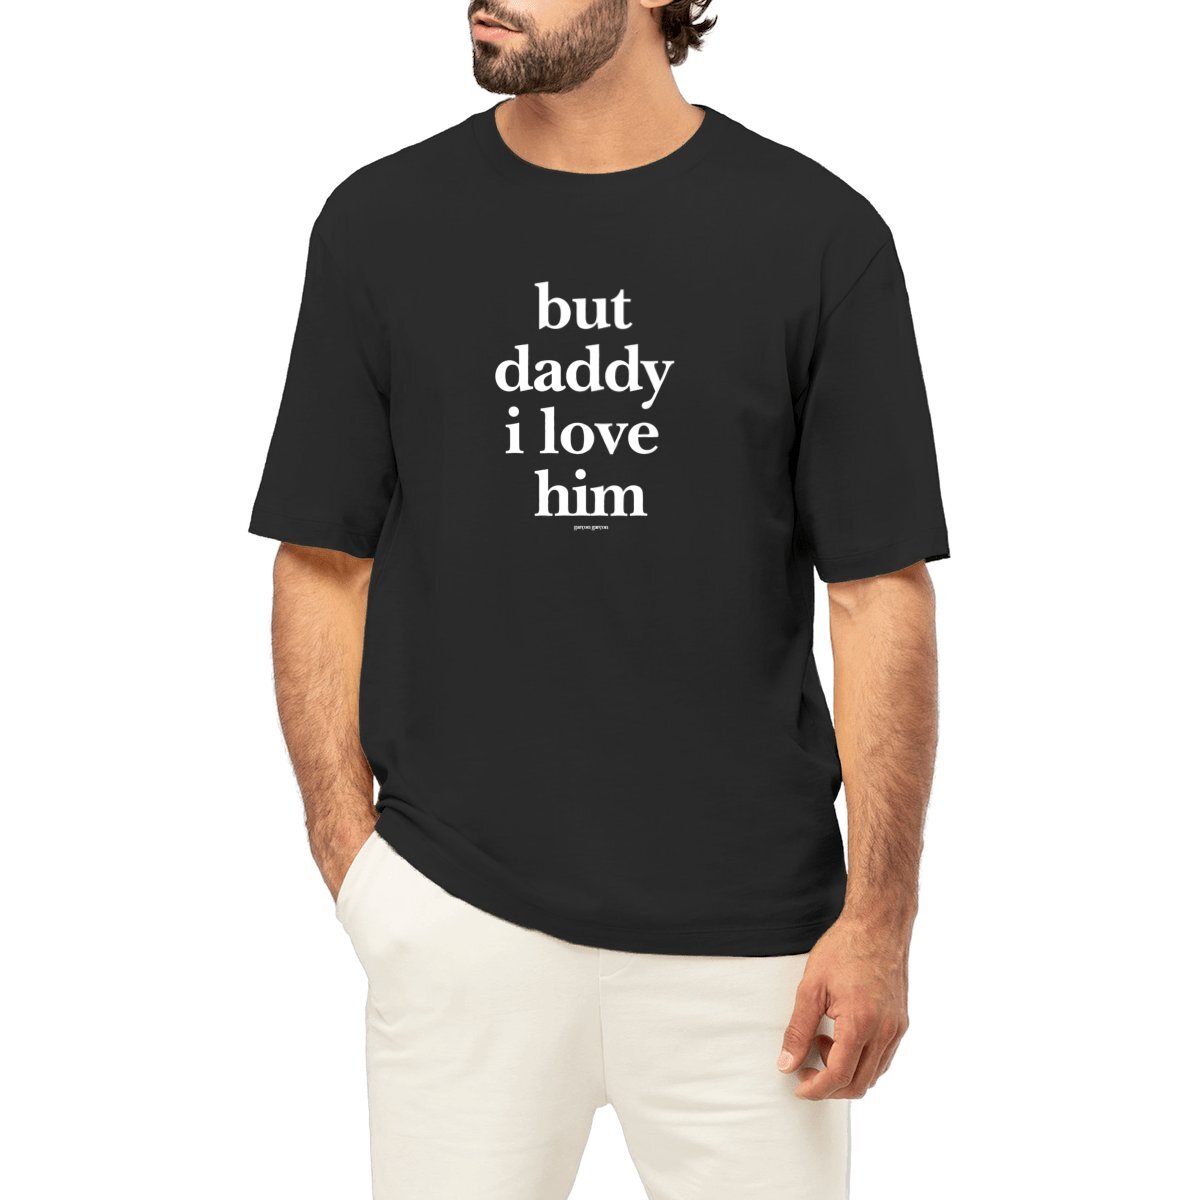 but daddy i love him tee oversized. garçon garçon tee oversize BLACK. Dive into the essence of Parisian cool with this oversized tee. The subtle 'garçon garçon' signature whispers a chic narrative, offering a slice of the city's famed elegance. Perfect for those who speak style with simplicity.